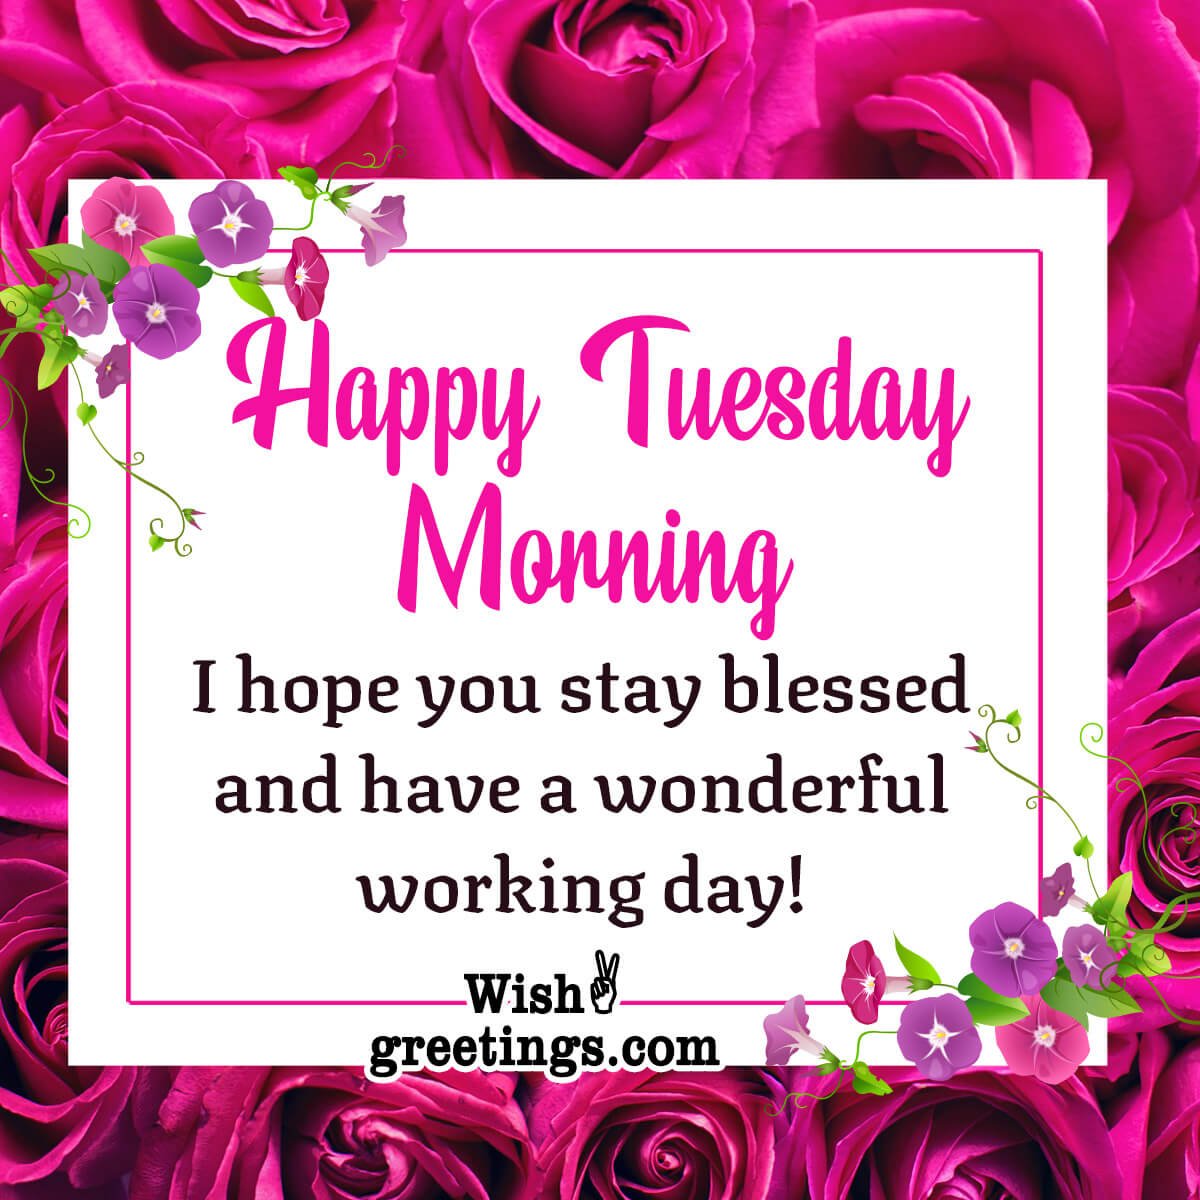 Happy Tuesday Morning Wishes